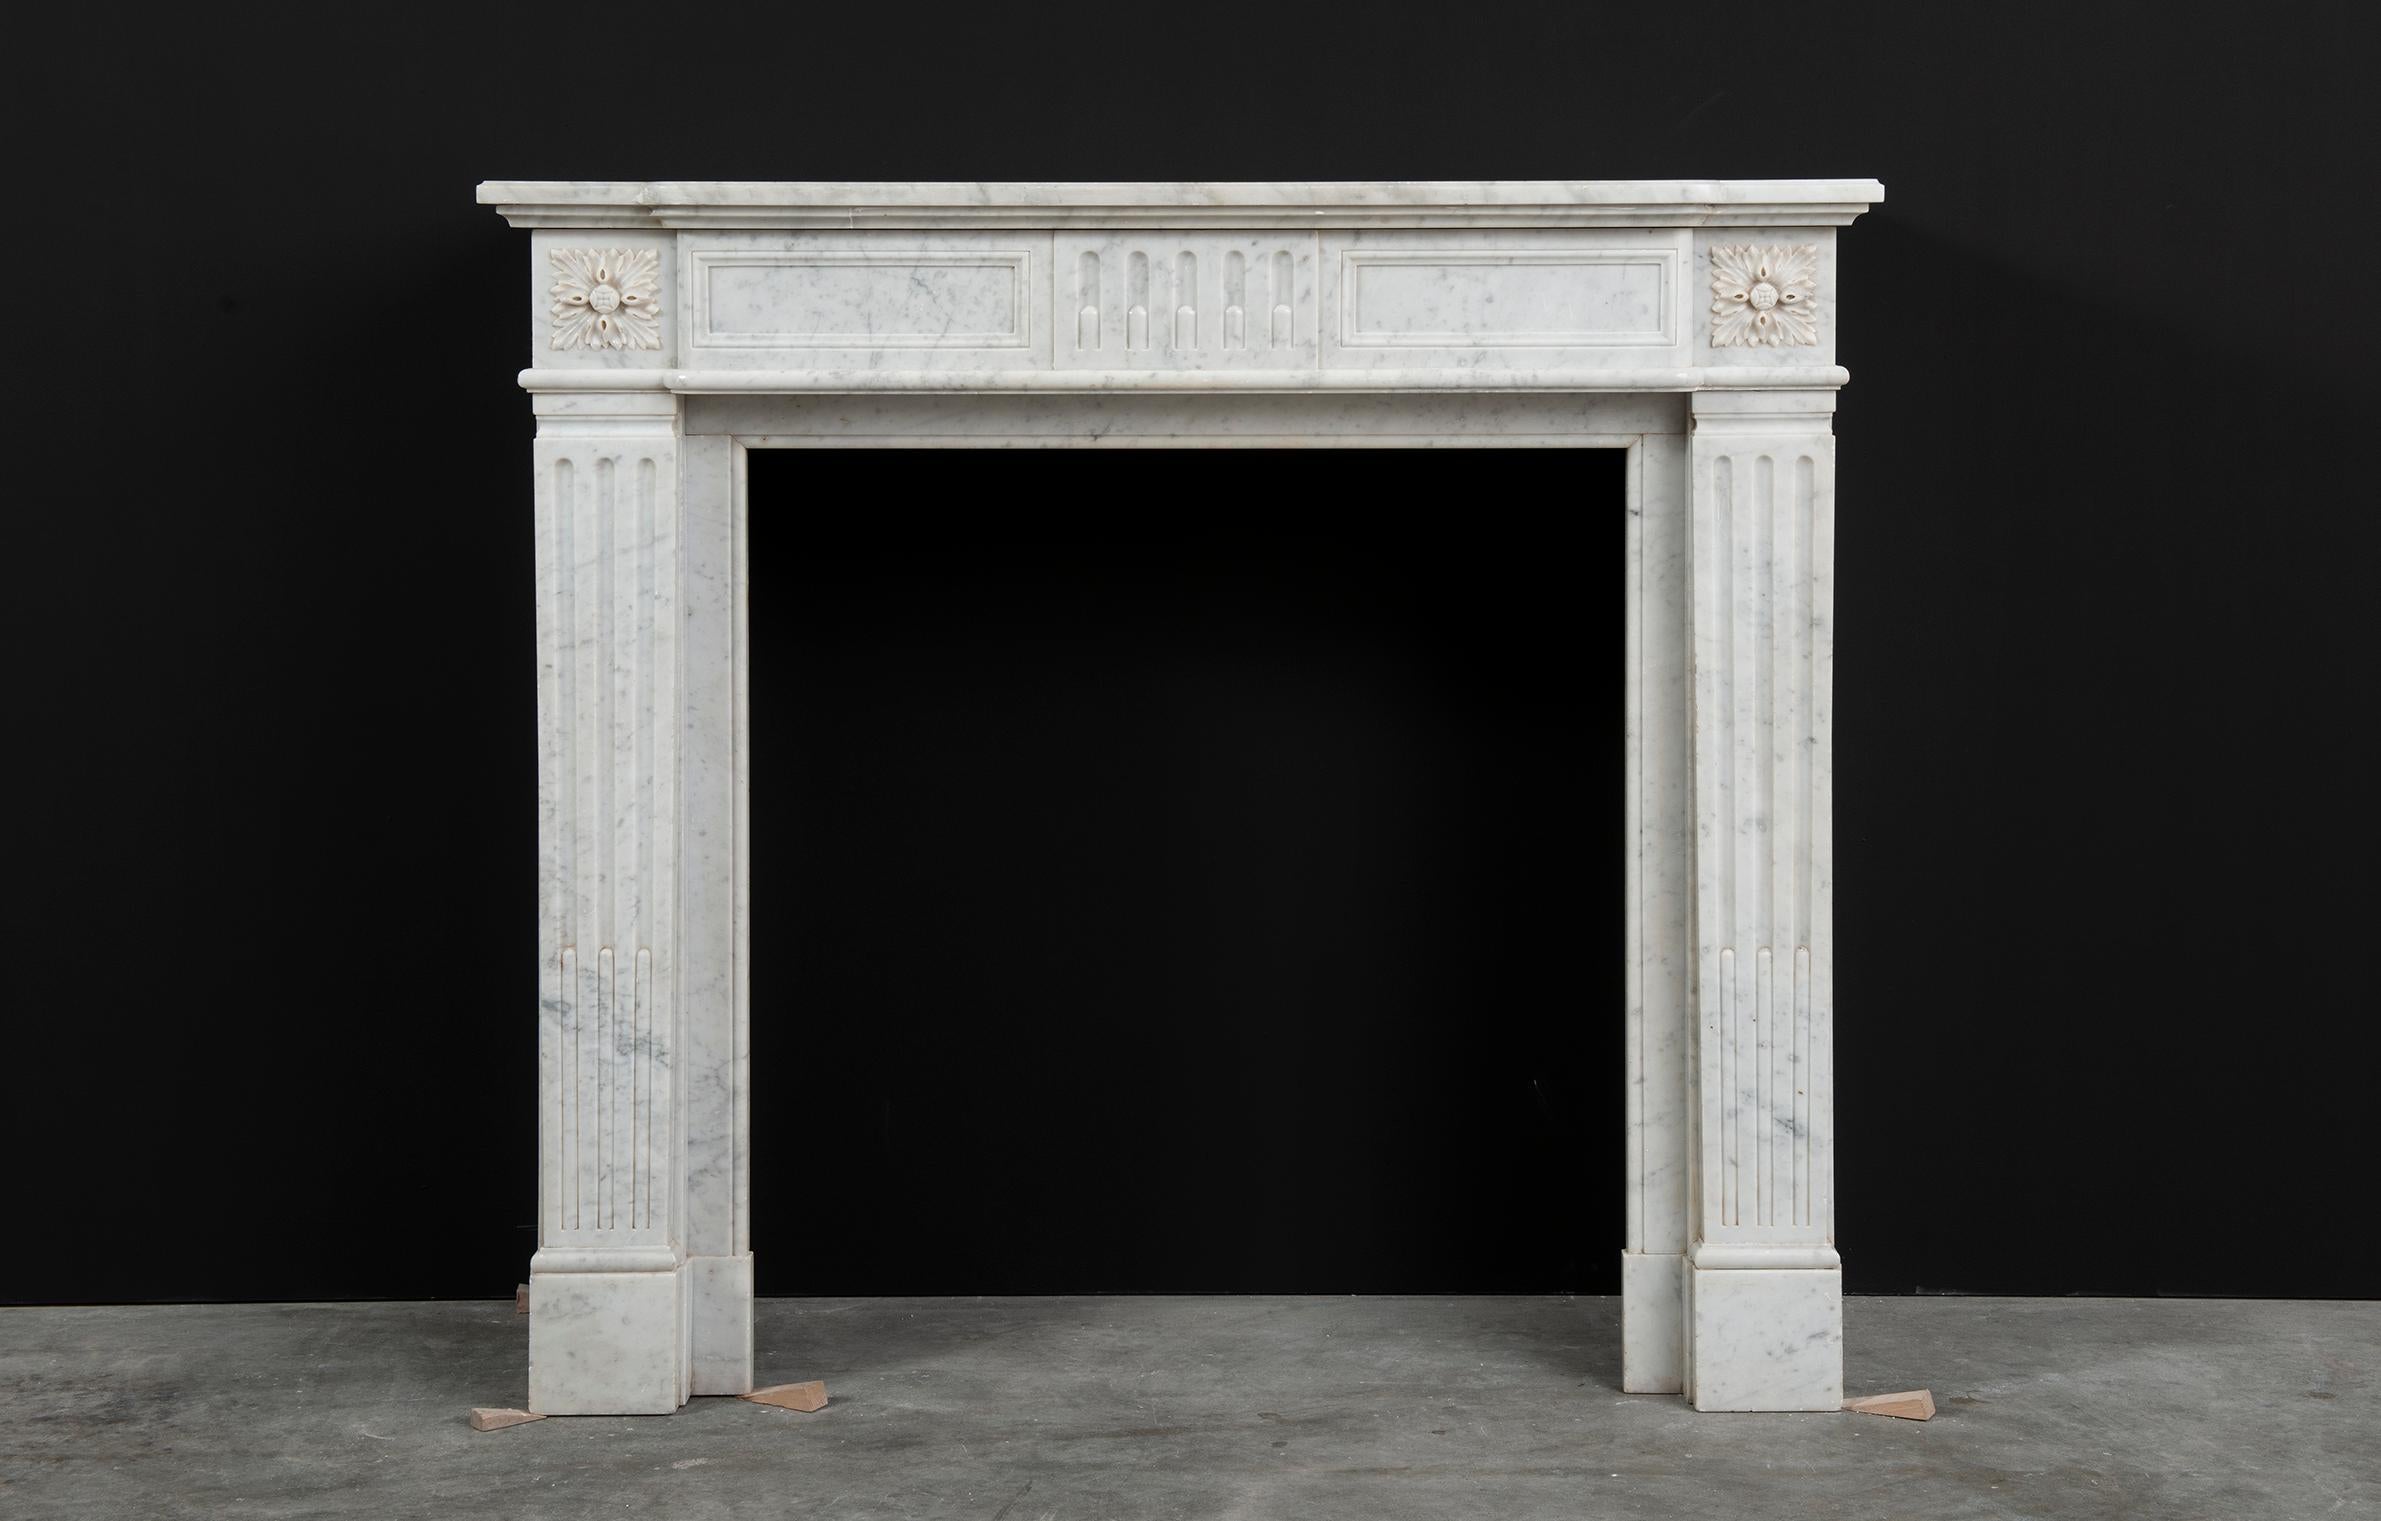 Happy to offer this small and lovely Louis XVI fireplace mantel in Carrara white marble. 

The moulded breakfront shelf sits above a paneled frieze centred by flutes adorned by acanthus paterae endblocks on both sides. These enblocks rest on